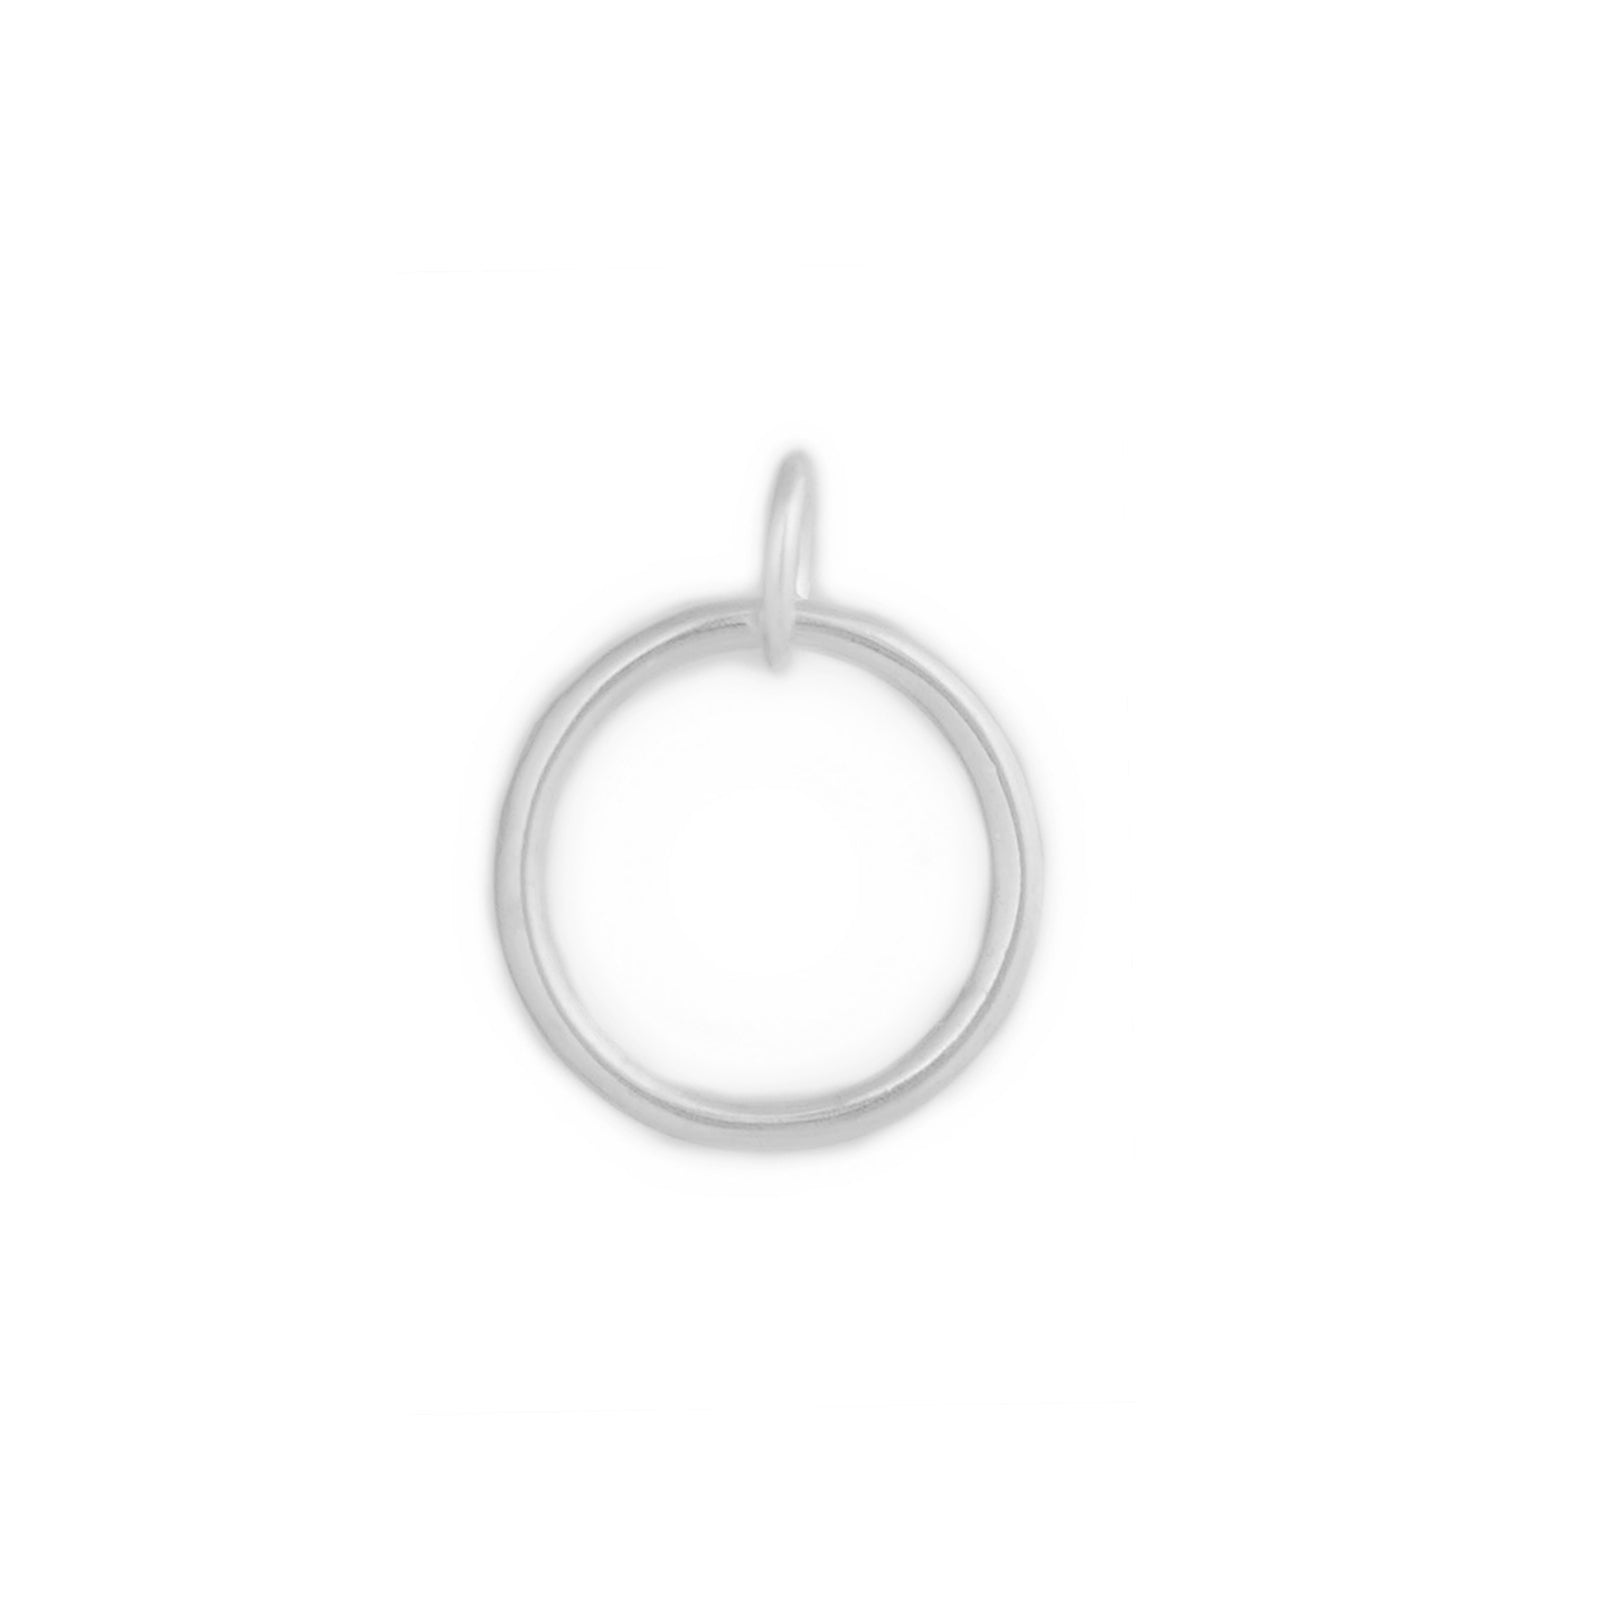 Sterling Silver Hollow Square Triangle Circle Star Necklace Earring Charm Pendant - sugarkittenlondon